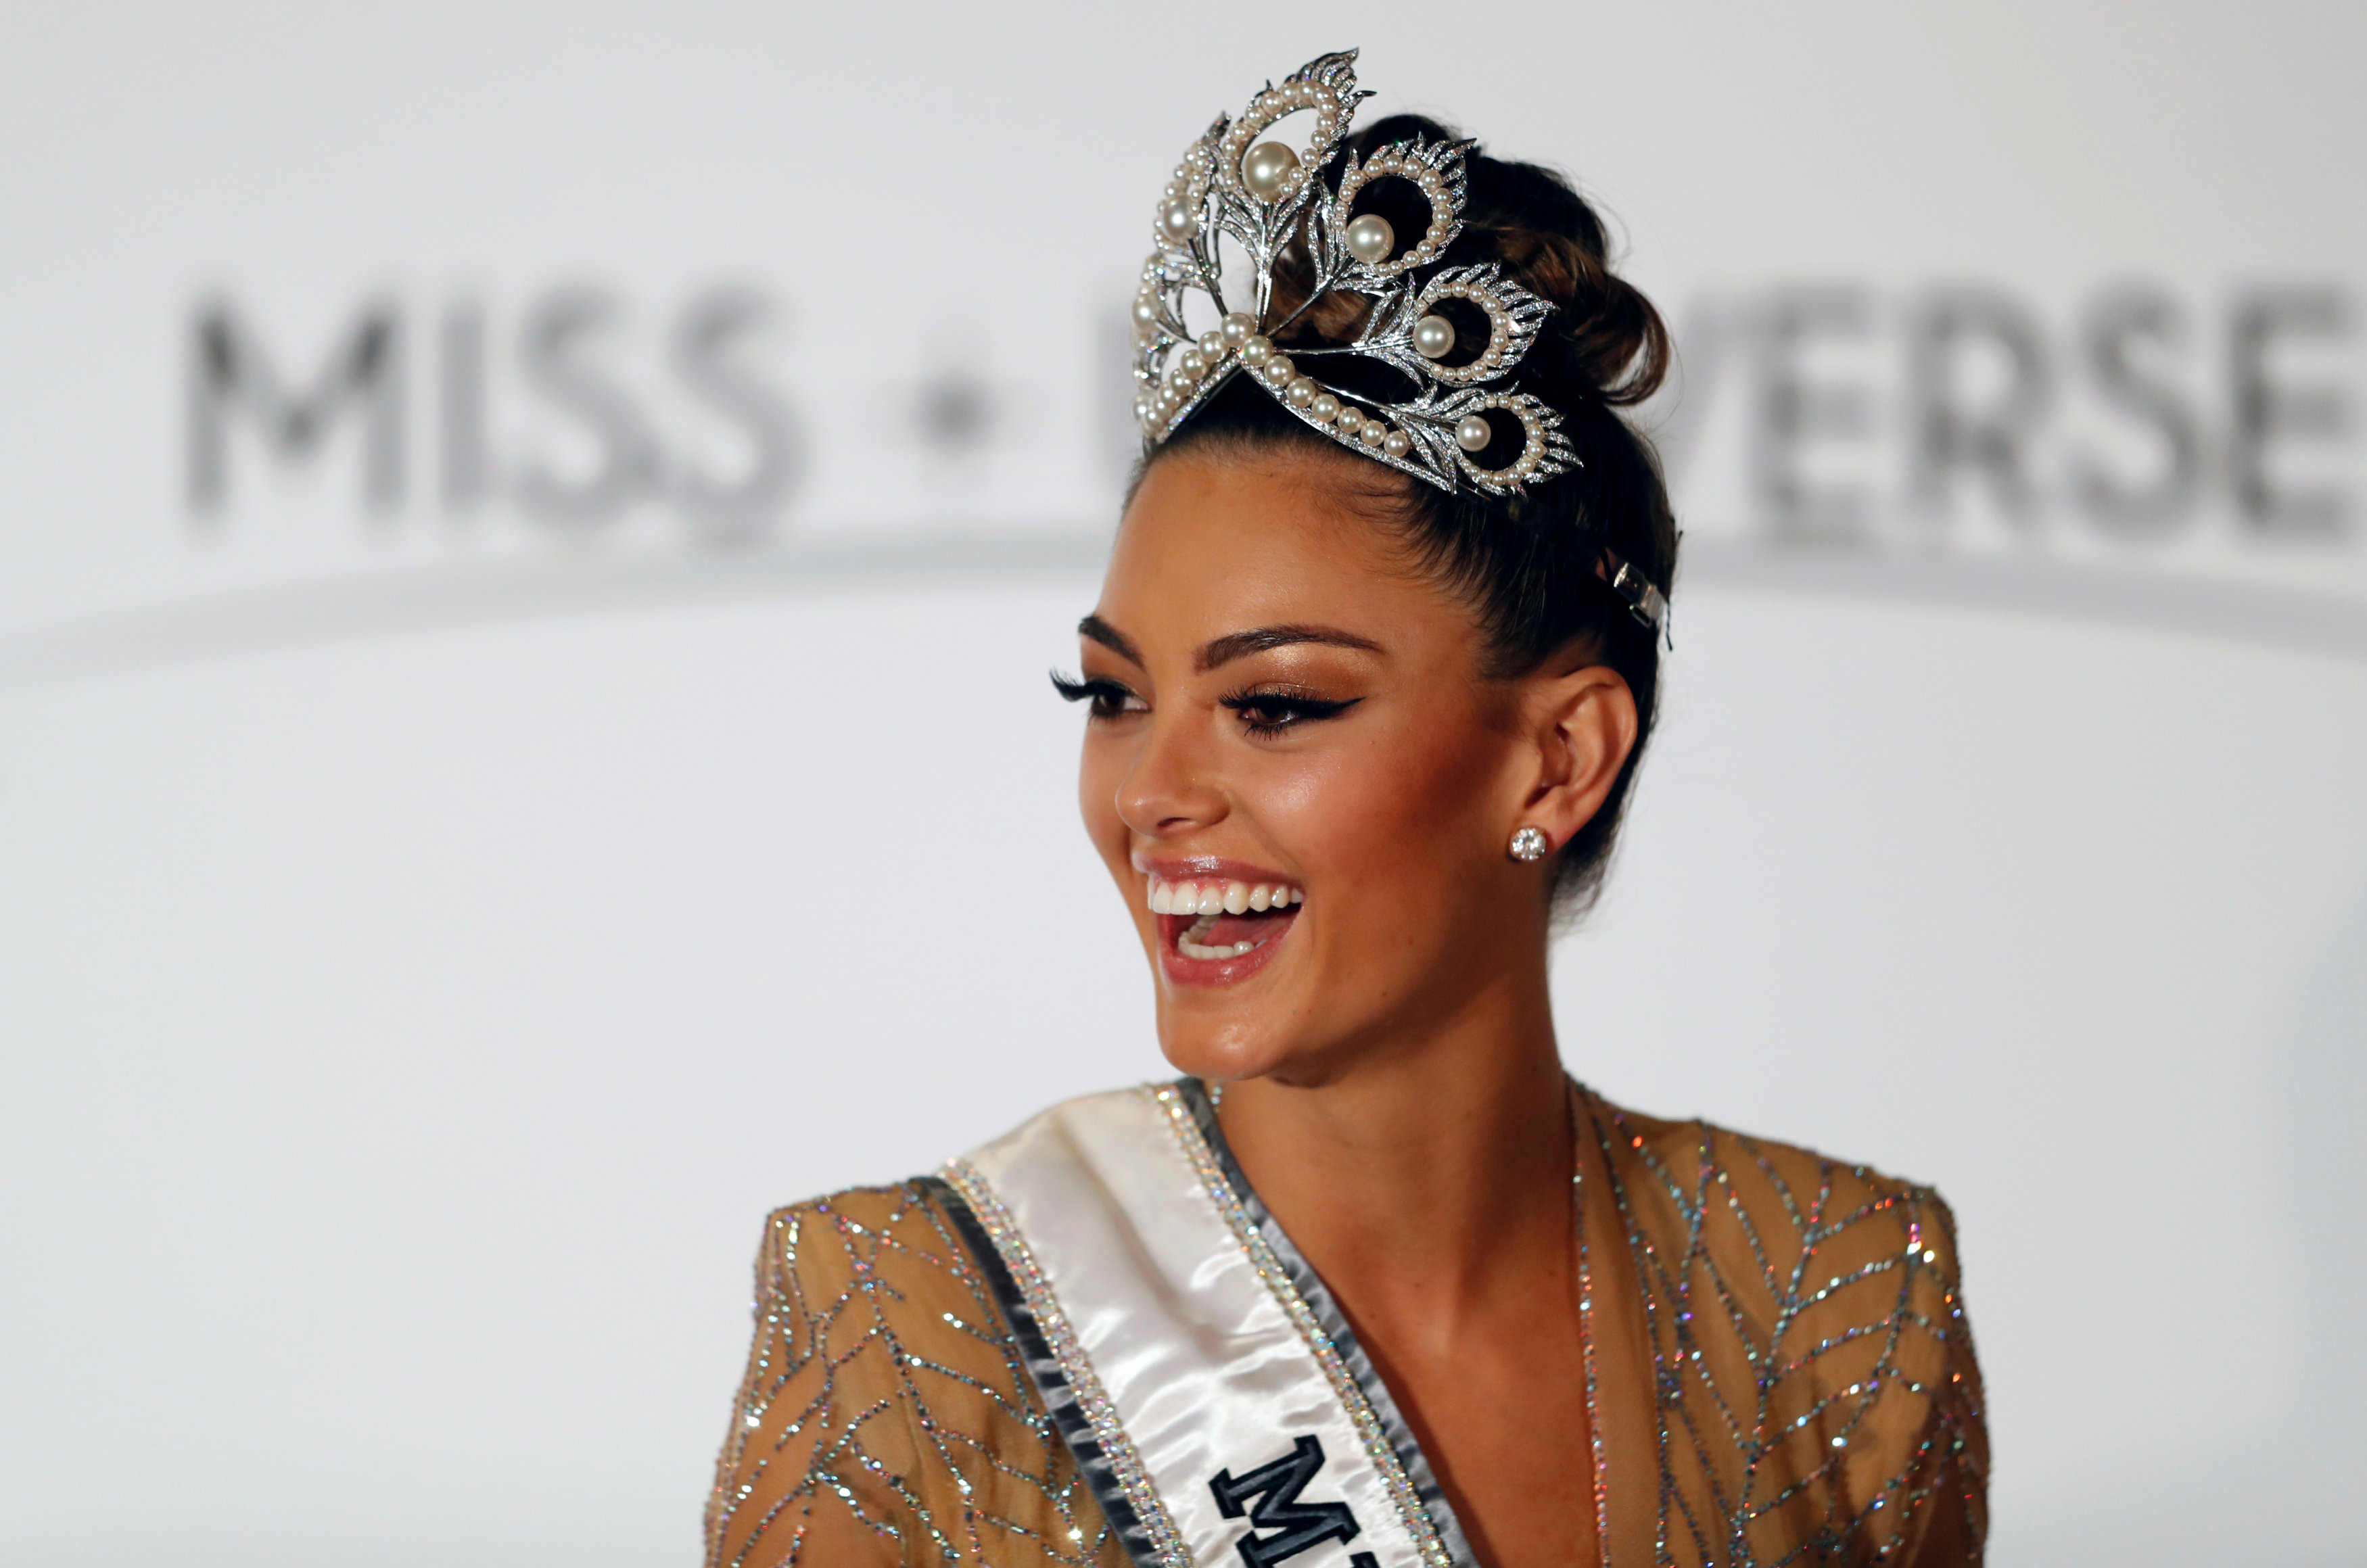 Miss South Africa crowned Miss Universe